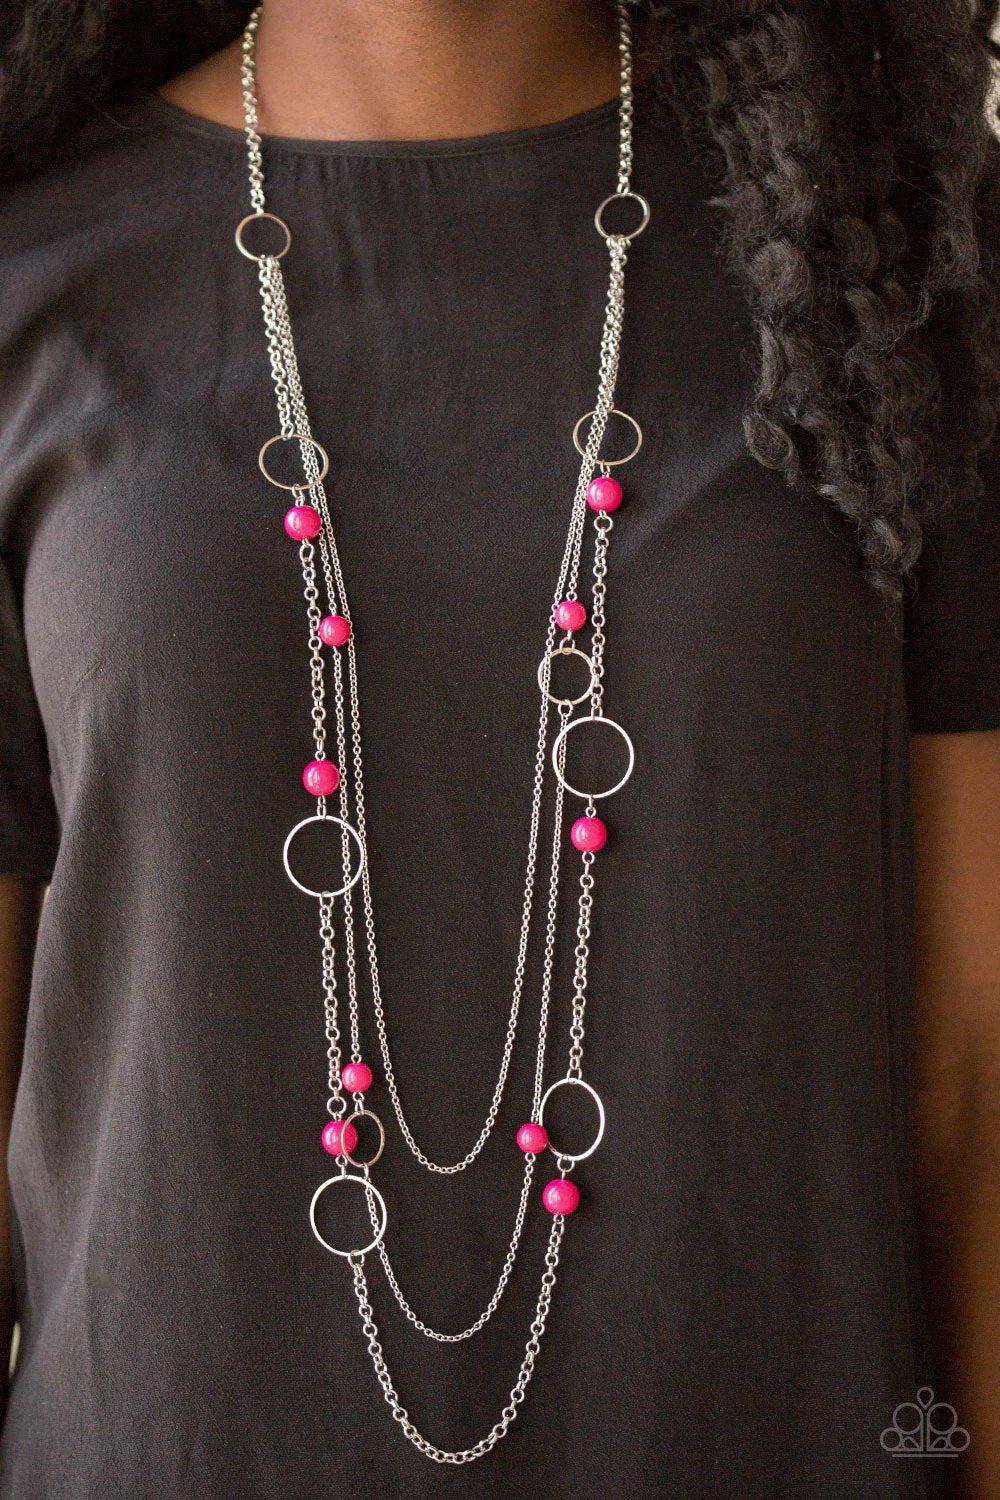 Beachside Babe Pink Necklace - Paparazzi Accessories- lightbox - CarasShop.com - $5 Jewelry by Cara Jewels